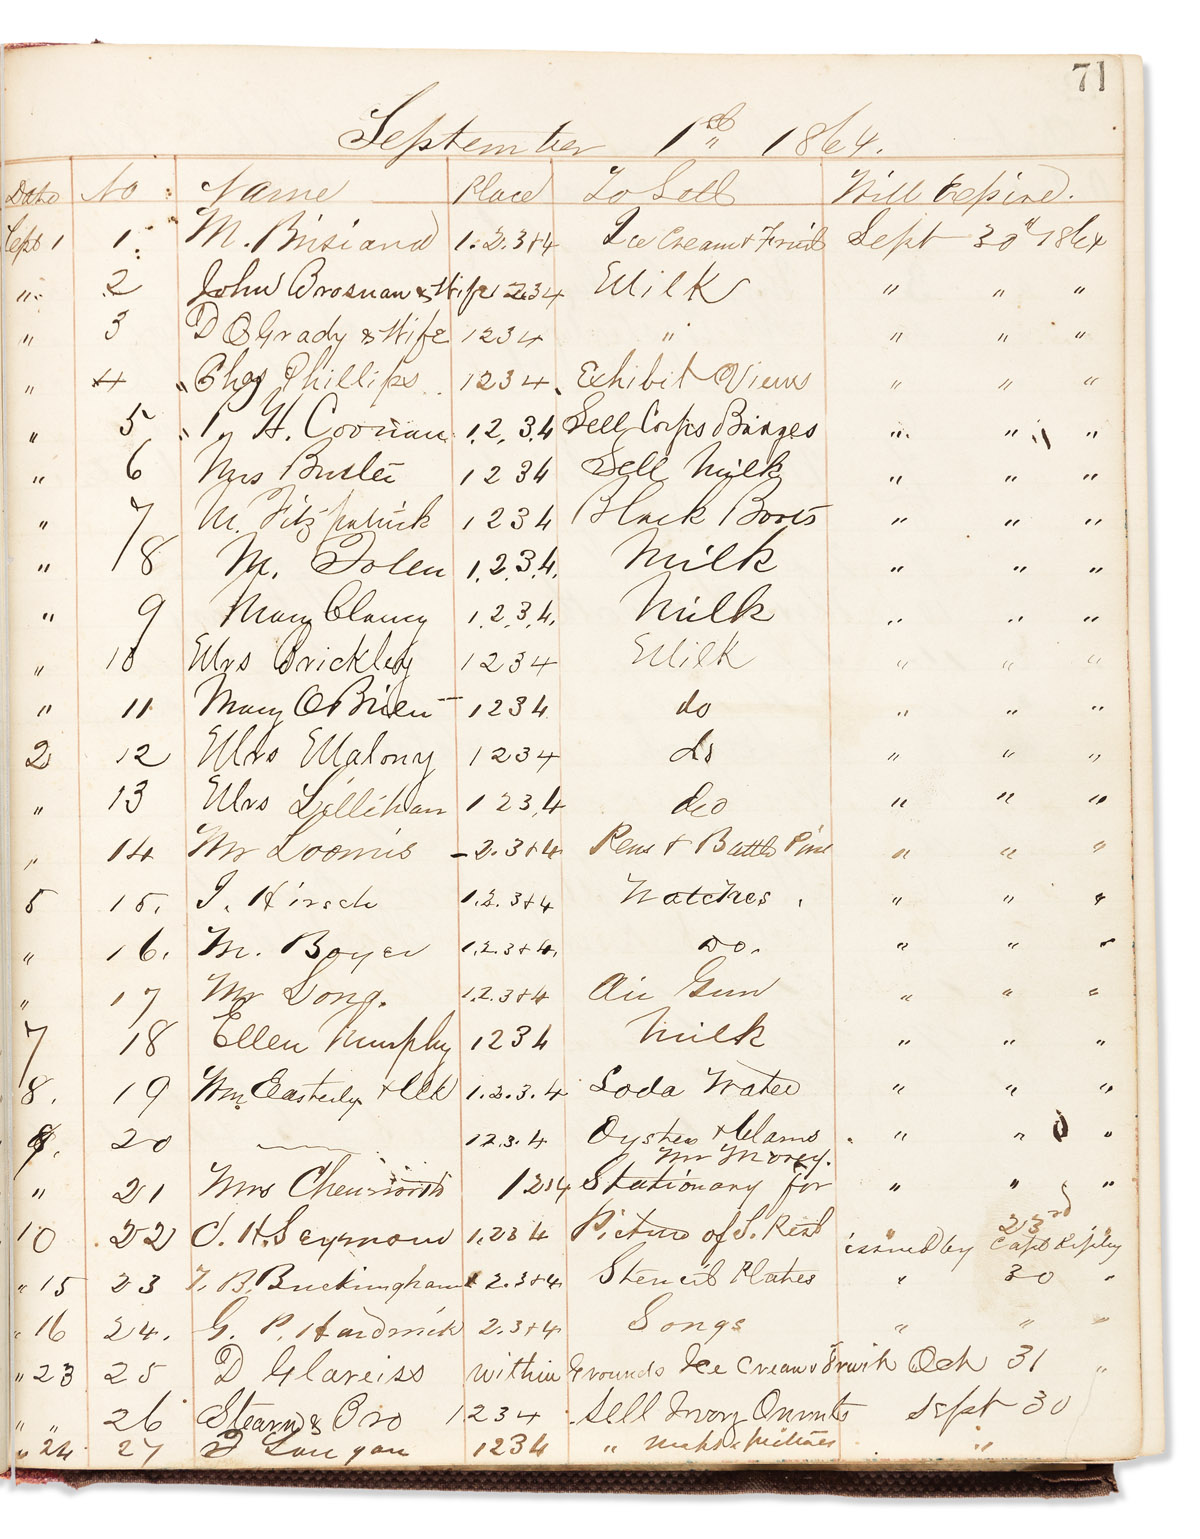 (CIVIL WAR.) Erskine M. Camp. Register of travel requisitions and vendor licenses from the Soldiers Rest in Washington.